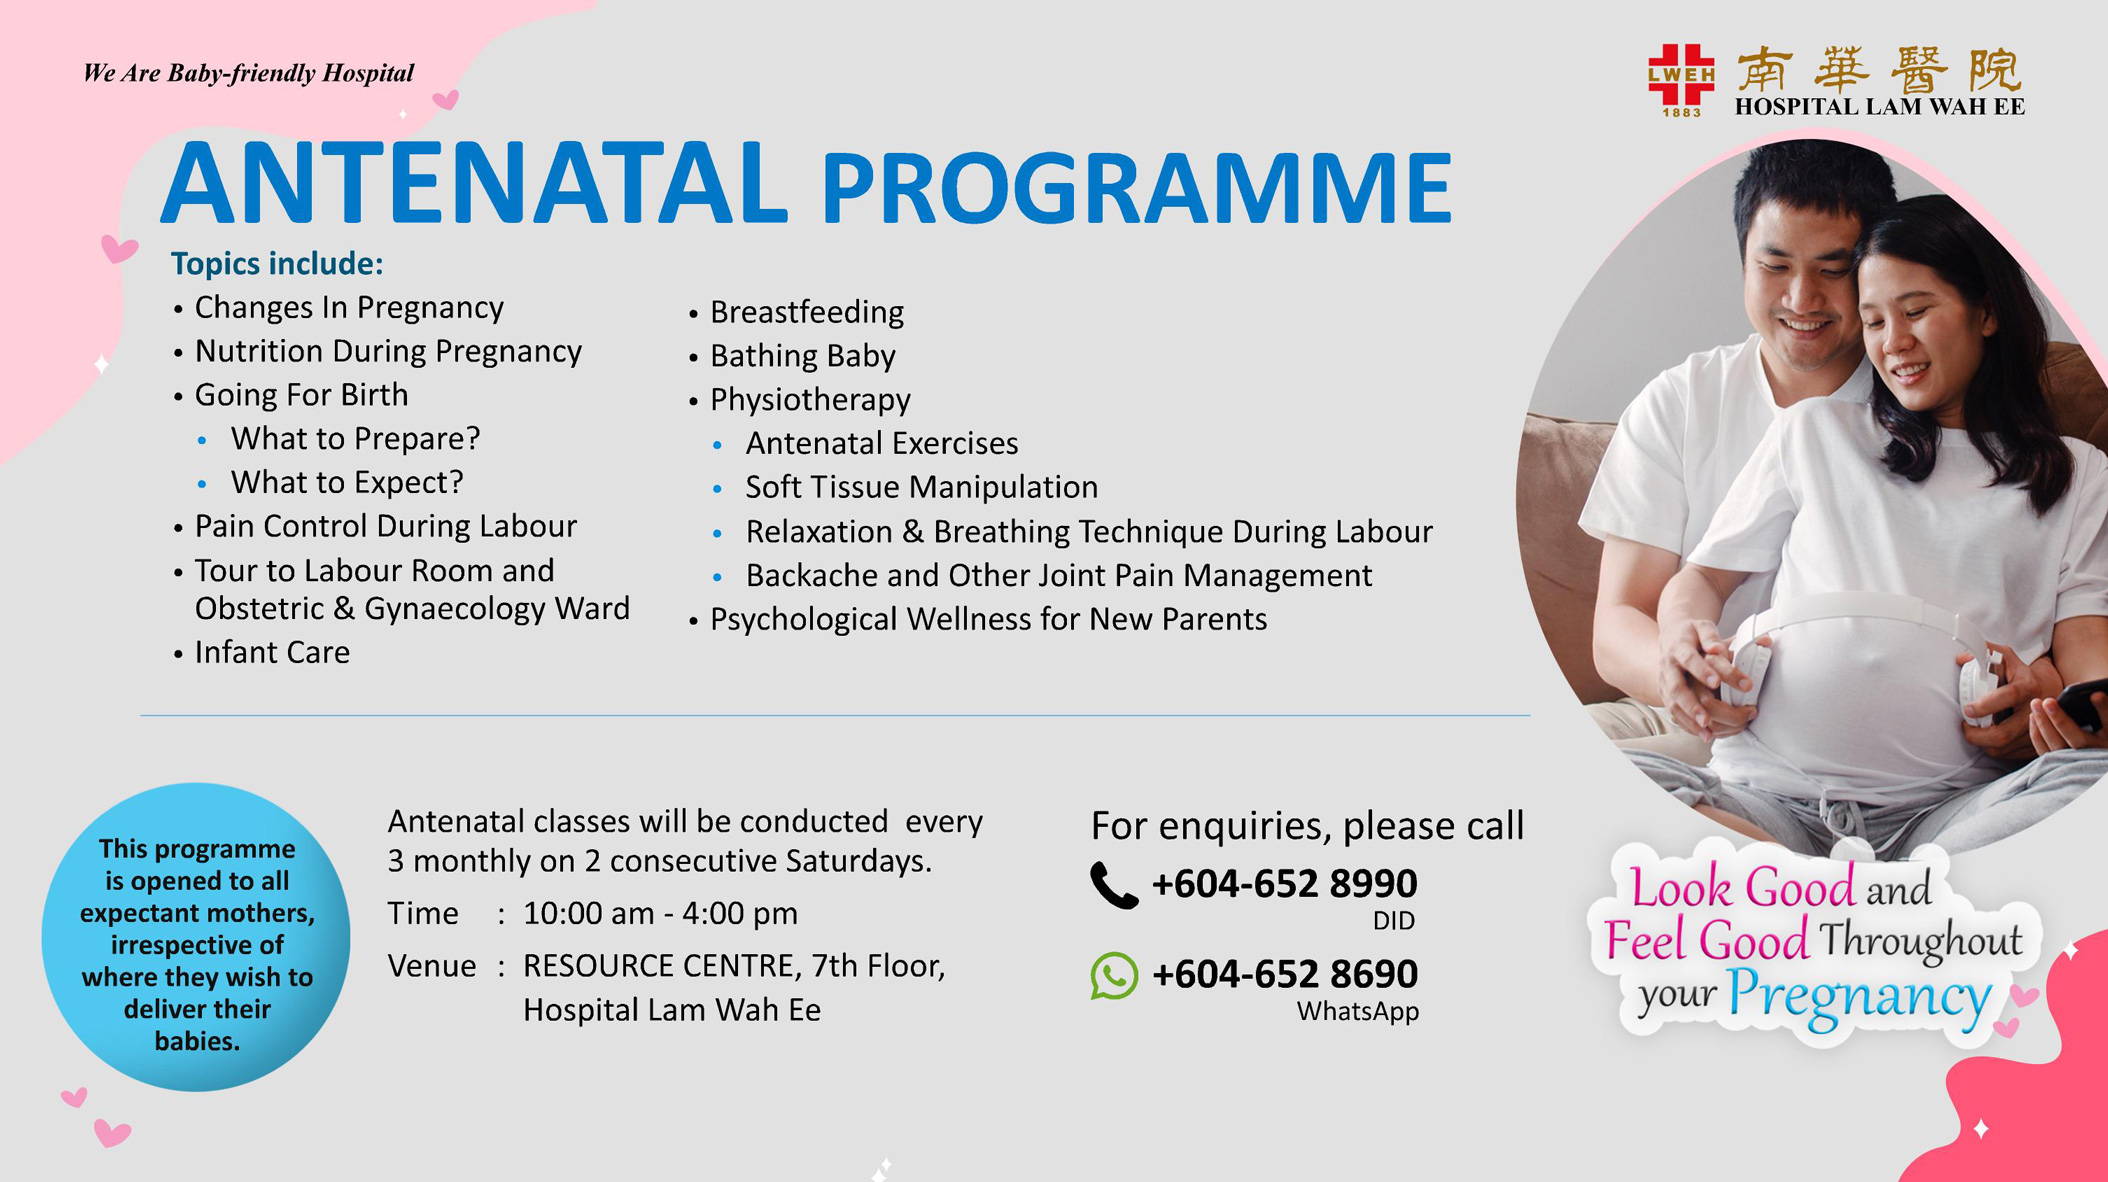 Antenatal Programme  Hospital Lam Wah Ee is an independent